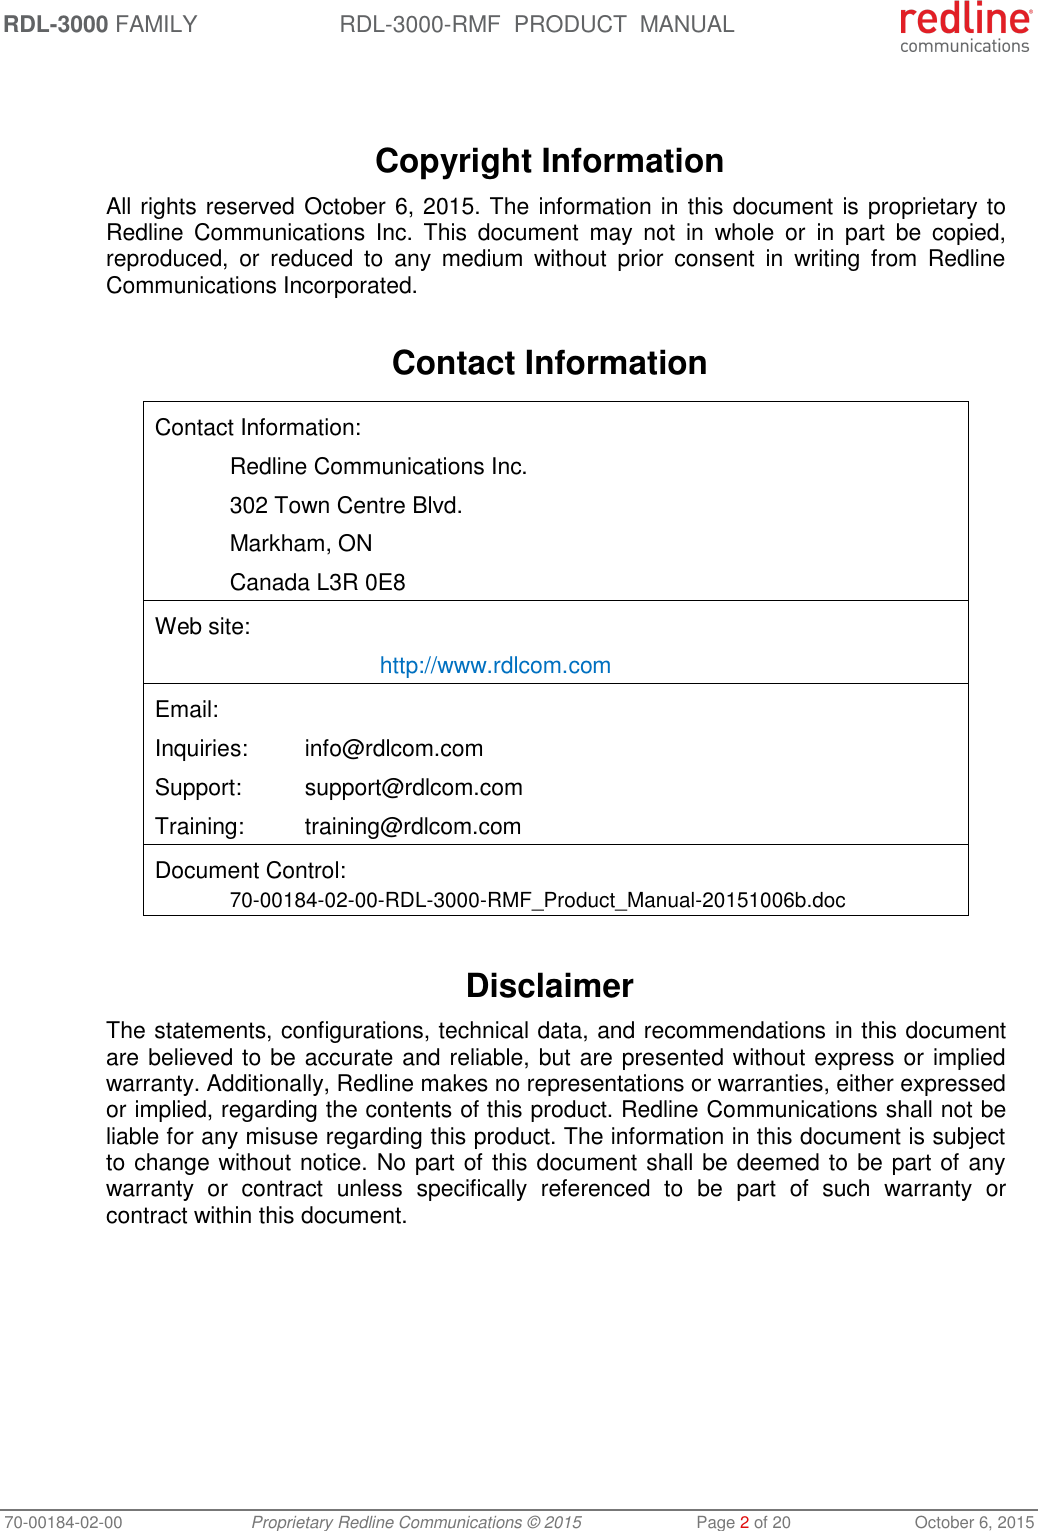 RDL-3000 FAMILY RDL-3000-RMF  PRODUCT  MANUAL 70-00184-02-00 Proprietary Redline Communications © 2015  Page 2 of 20  October 6, 2015    Copyright Information All rights reserved October 6, 2015. The information in this document is proprietary to Redline  Communications  Inc.  This  document  may  not  in  whole  or  in  part  be  copied, reproduced,  or  reduced  to  any  medium  without  prior  consent  in  writing  from  Redline Communications Incorporated.  Contact Information  Contact Information:   Redline Communications Inc.   302 Town Centre Blvd.   Markham, ON   Canada L3R 0E8 Web site:    http://www.rdlcom.com Email: Inquiries:  info@rdlcom.com  Support:  support@rdlcom.com  Training:  training@rdlcom.com Document Control:  70-00184-02-00-RDL-3000-RMF_Product_Manual-20151006b.doc  Disclaimer The statements, configurations, technical data, and recommendations in this document are believed to be accurate and reliable, but are presented without express or implied warranty. Additionally, Redline makes no representations or warranties, either expressed or implied, regarding the contents of this product. Redline Communications shall not be liable for any misuse regarding this product. The information in this document is subject to change without notice. No part of this document shall be deemed to be part of any warranty  or  contract  unless  specifically  referenced  to  be  part  of  such  warranty  or contract within this document. 